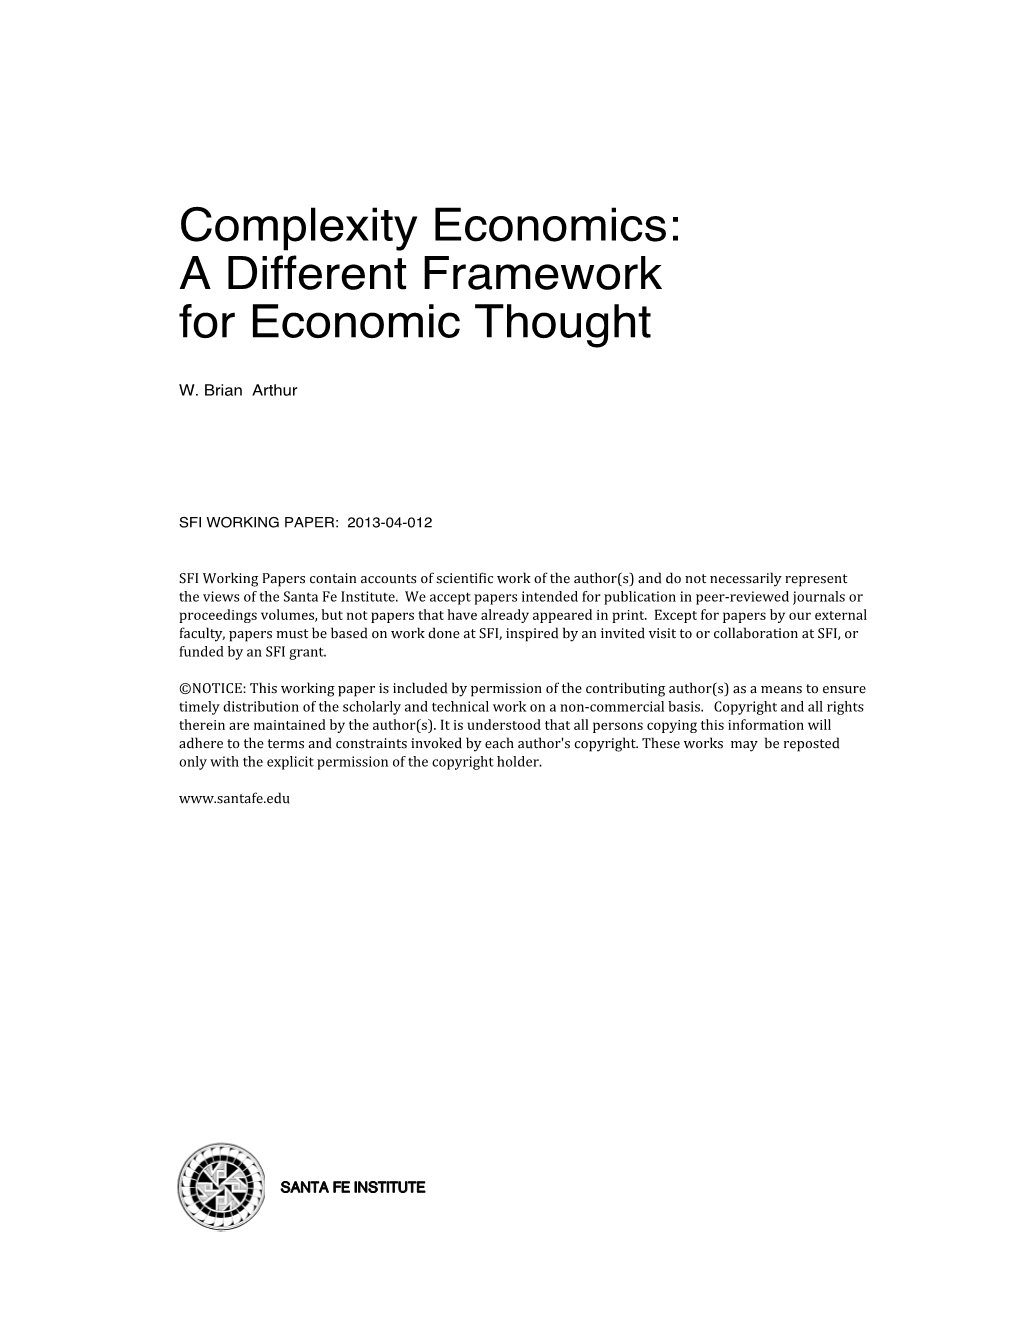 Complexity Economics: a Different Framework for Economic Thought